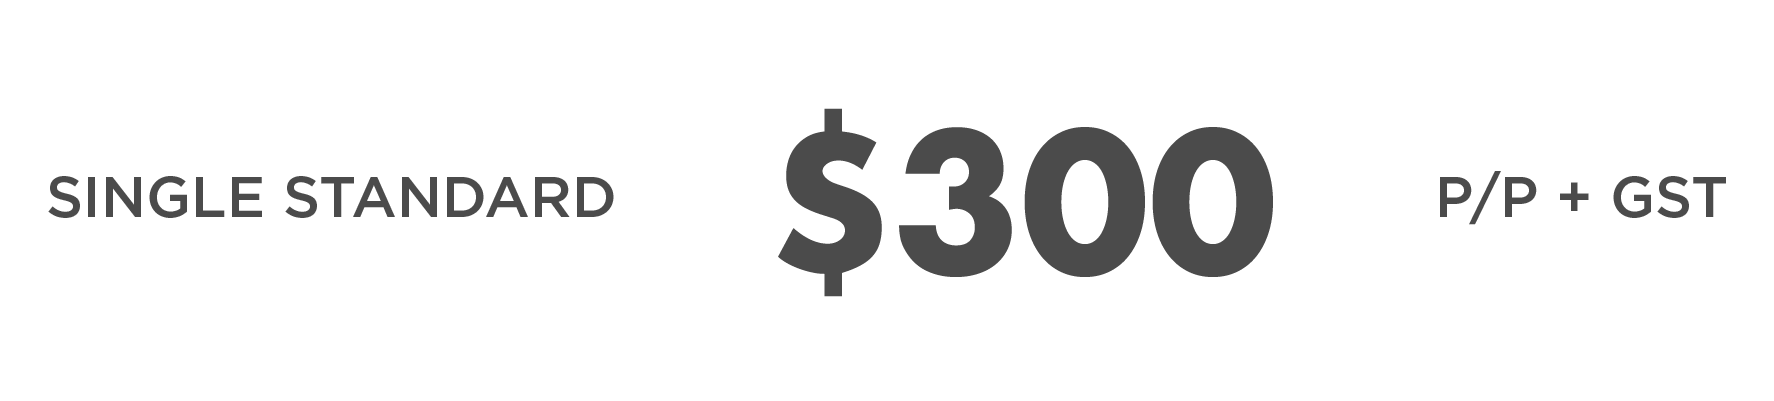 pricing-01.png